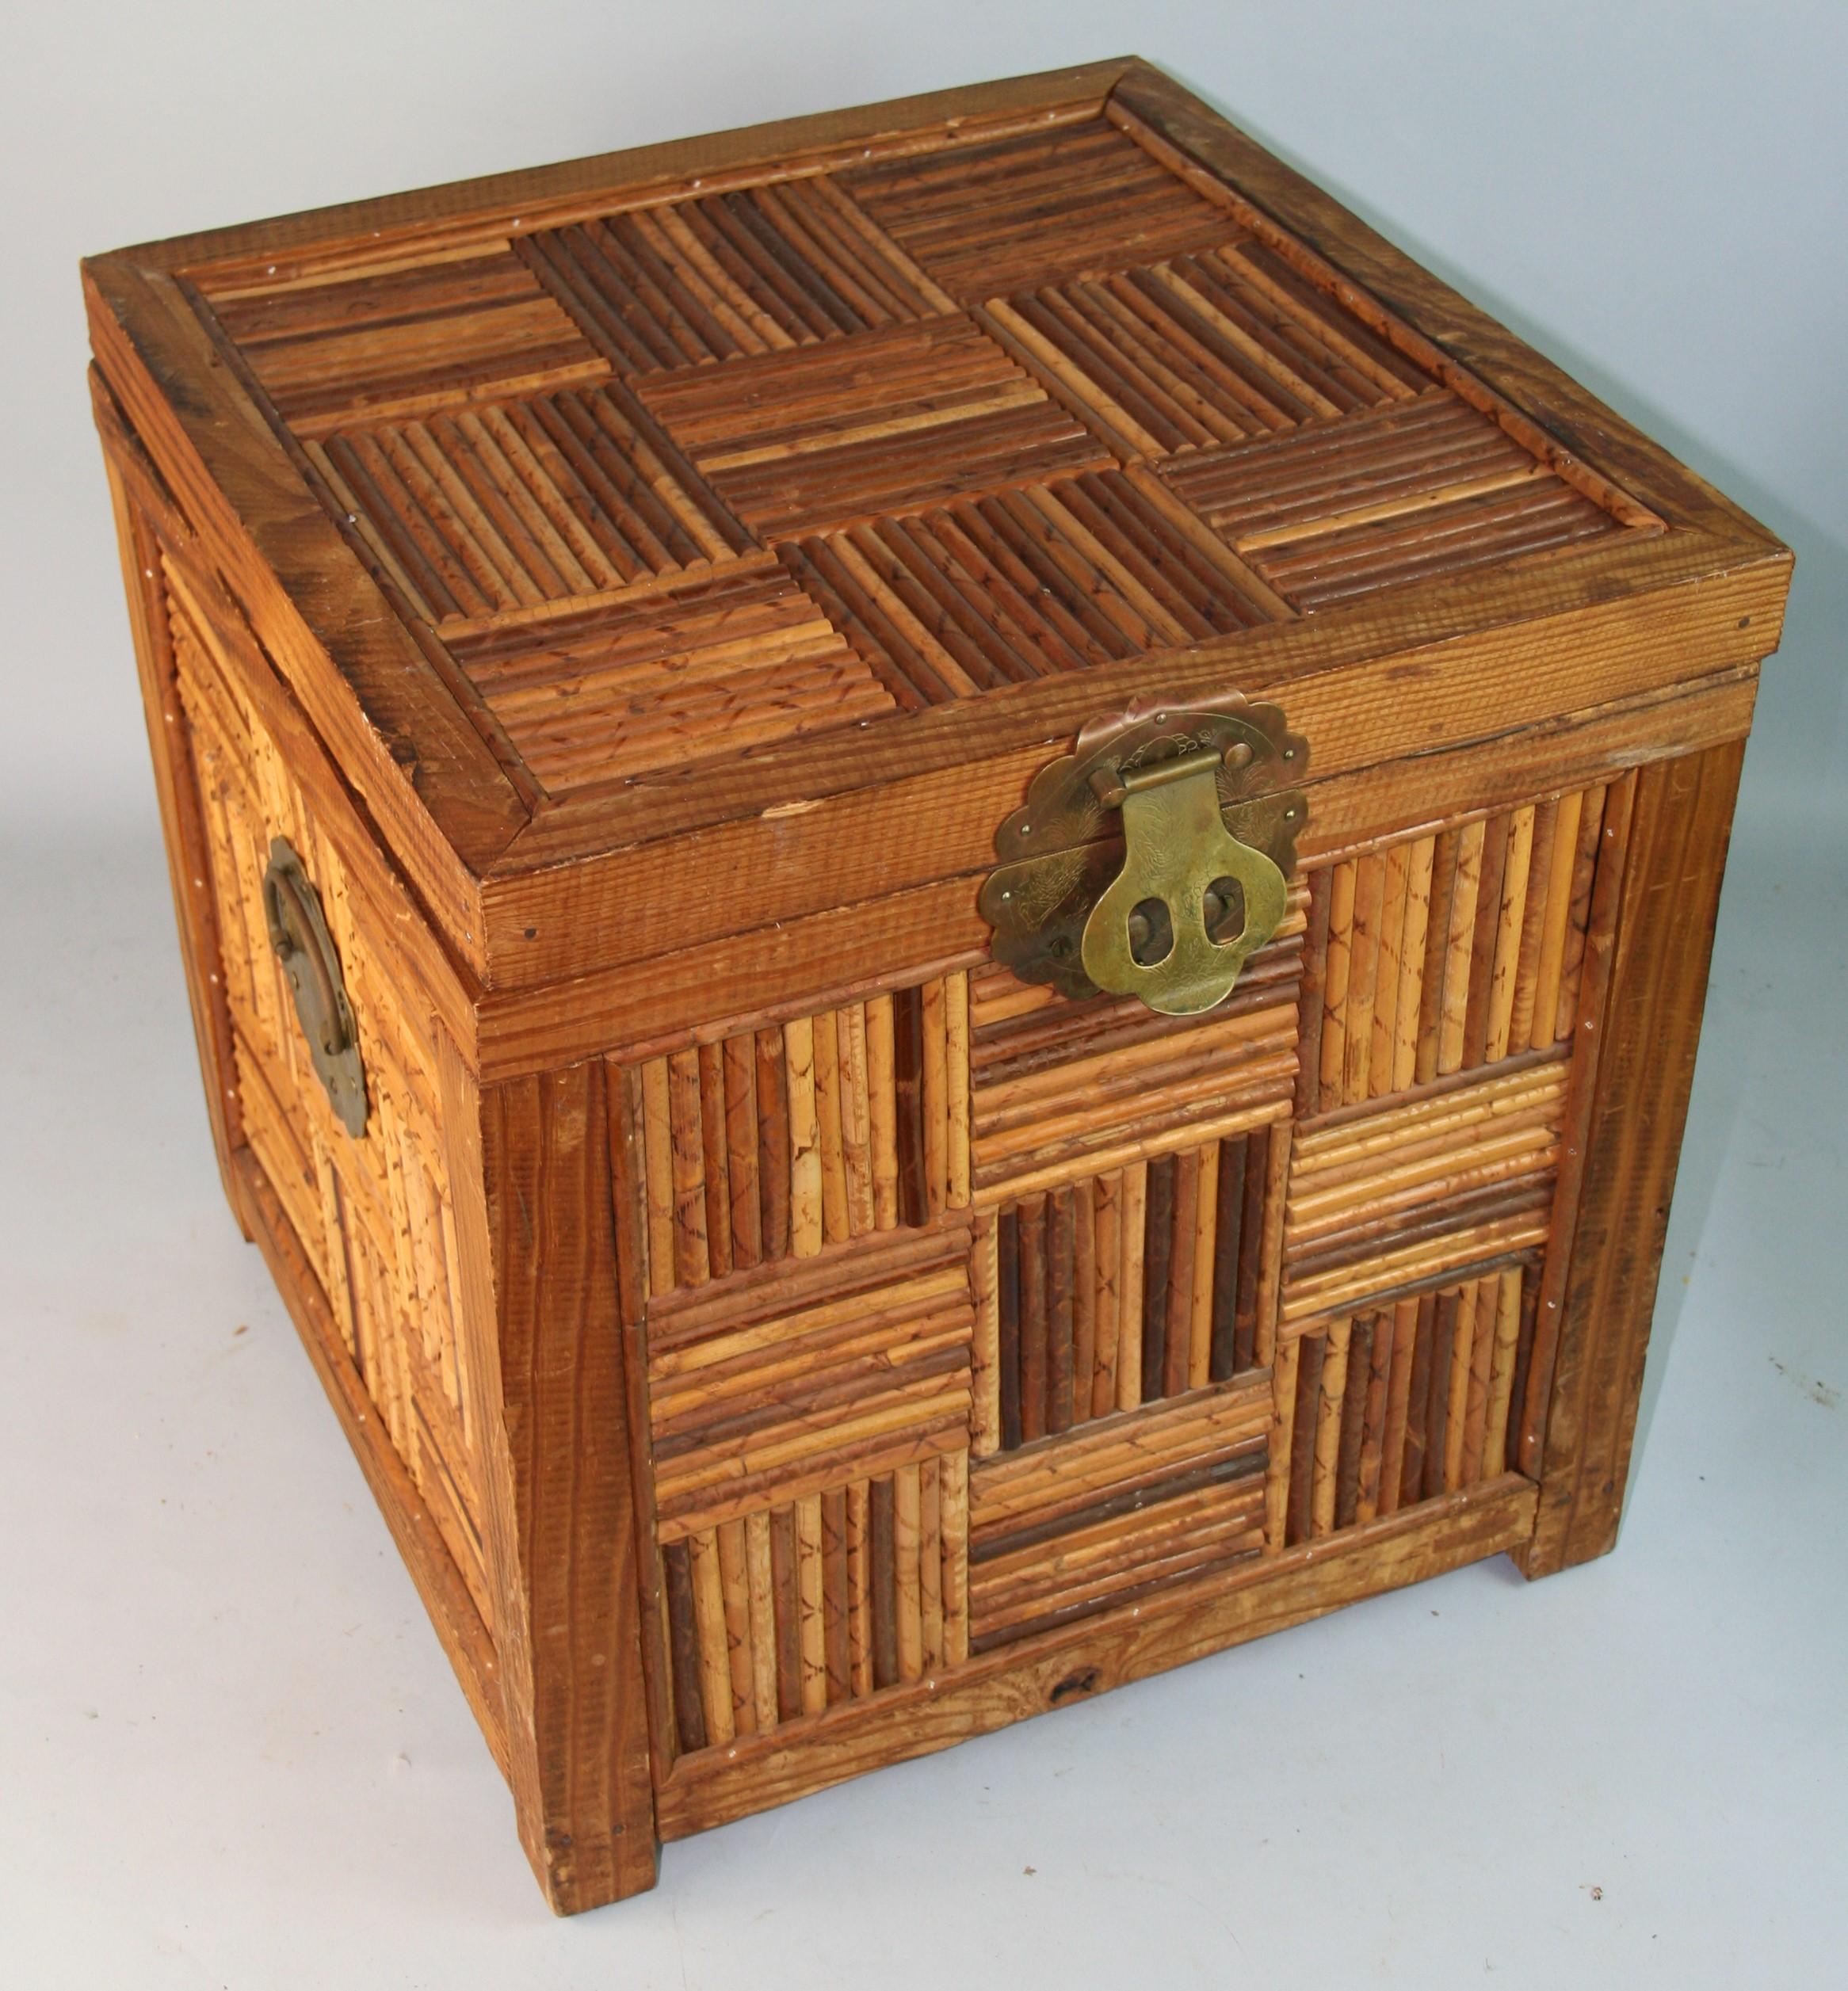 1497 Hand crafted side table storage box with brass latch and handles
